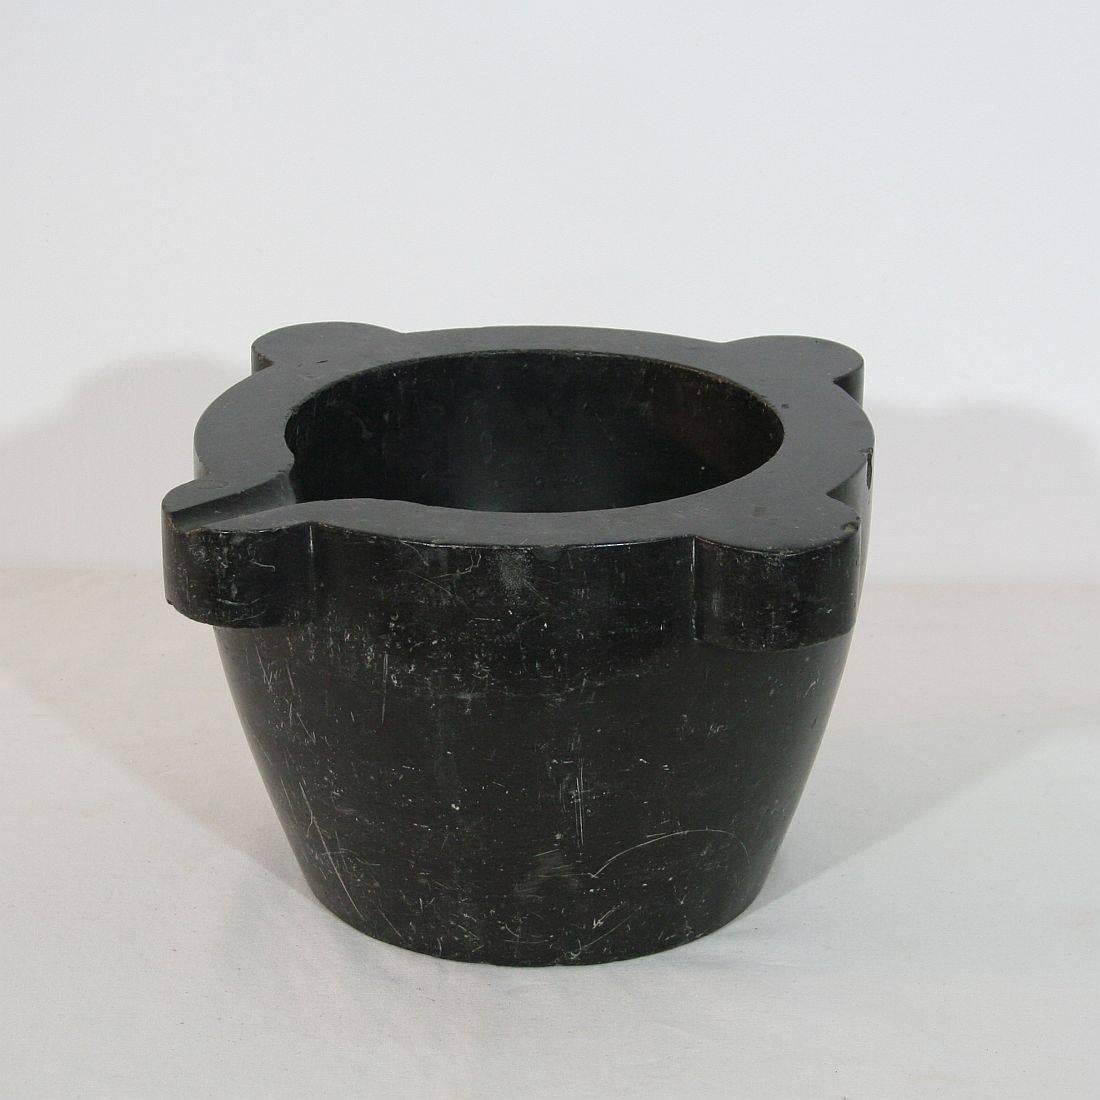 Beautiful and rare black marble mortar. France around 1750-1850. Great eye catcher.
Weathered but very good condition